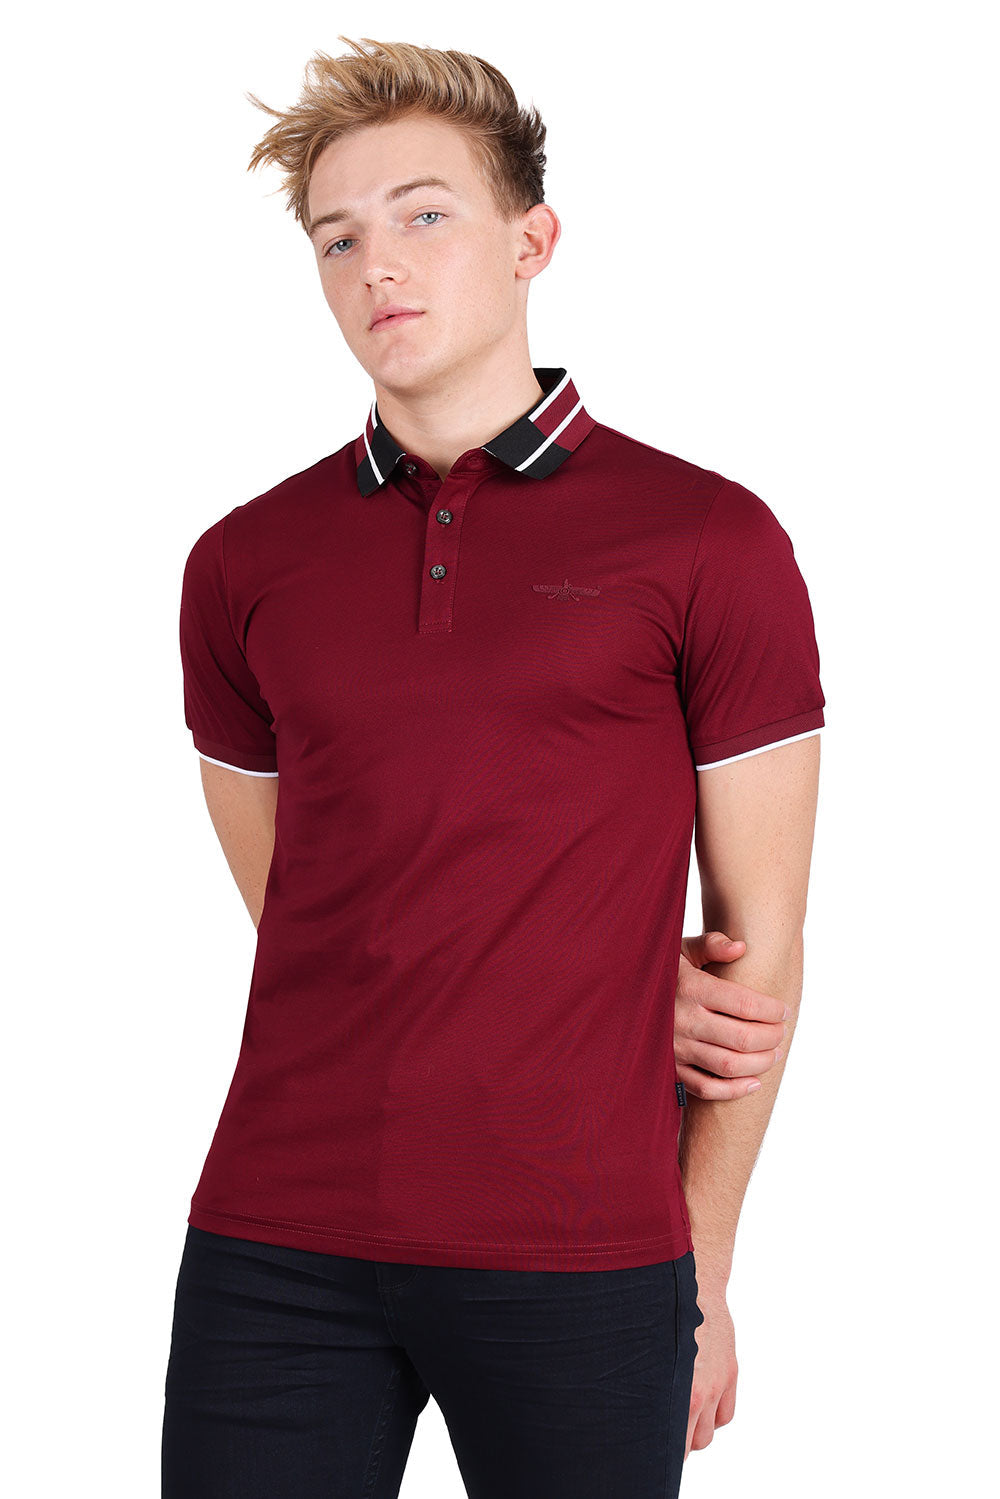 Barabas Men's Solid Color Luxury Short Sleeves Polo Shirts 2PP826 Wine